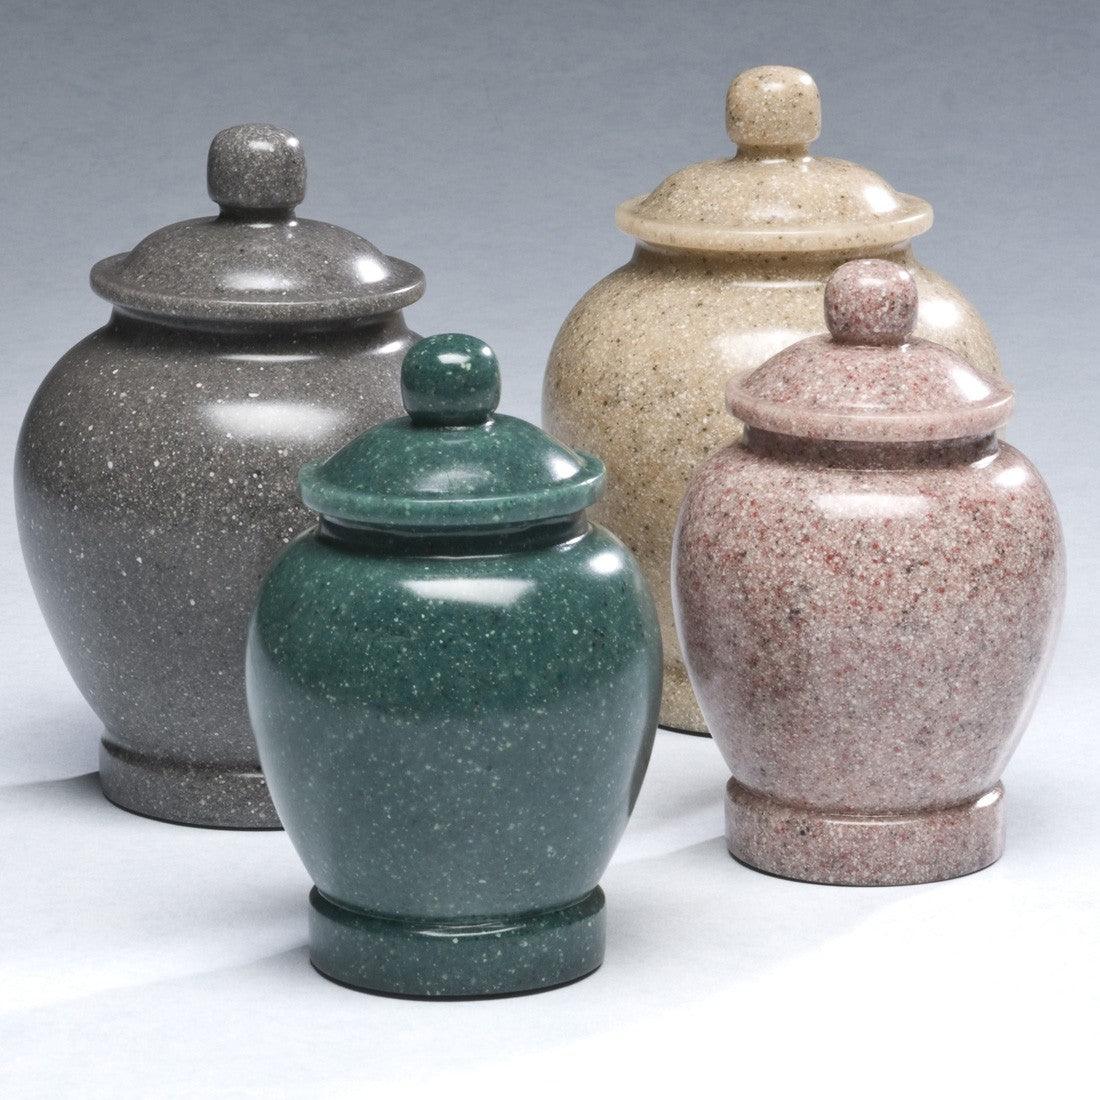 Pets Simulated Urns